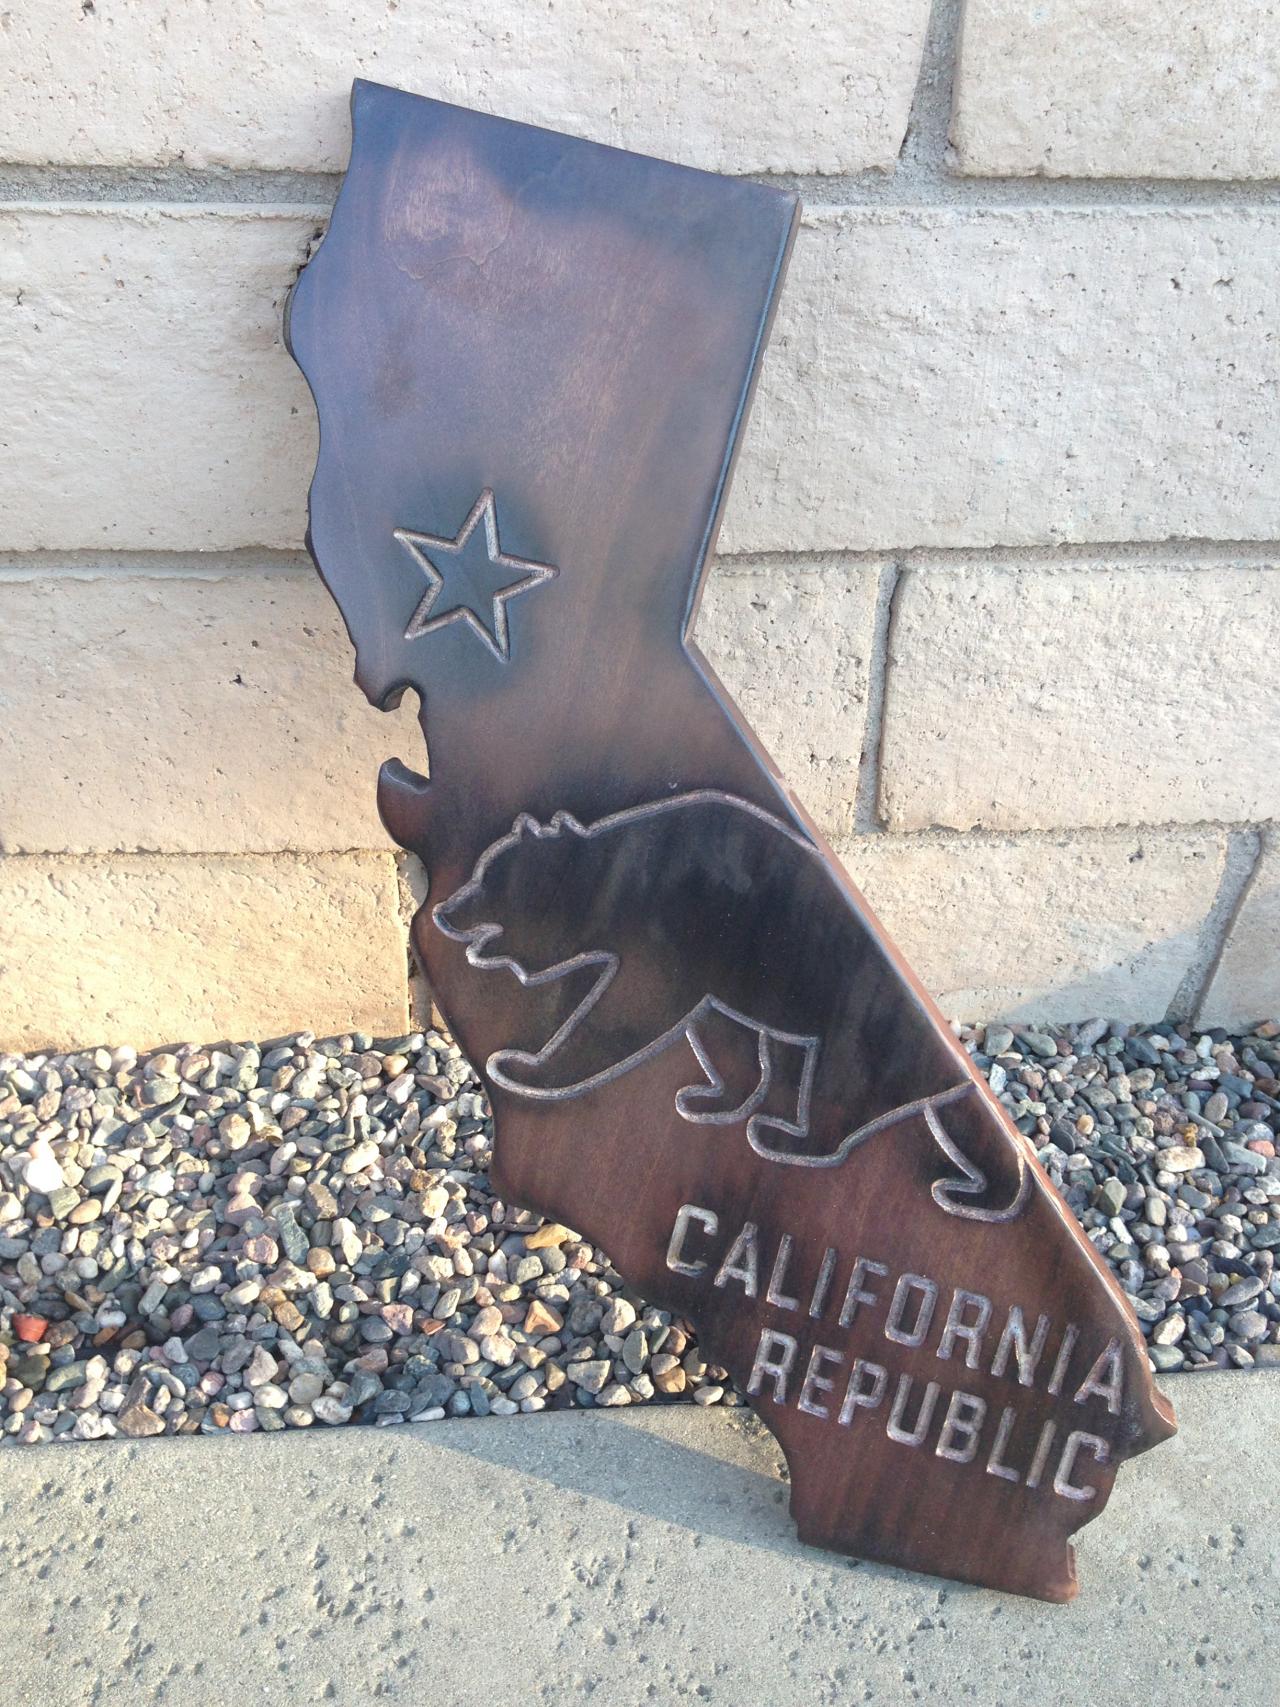 California State Wall Hanging Sign